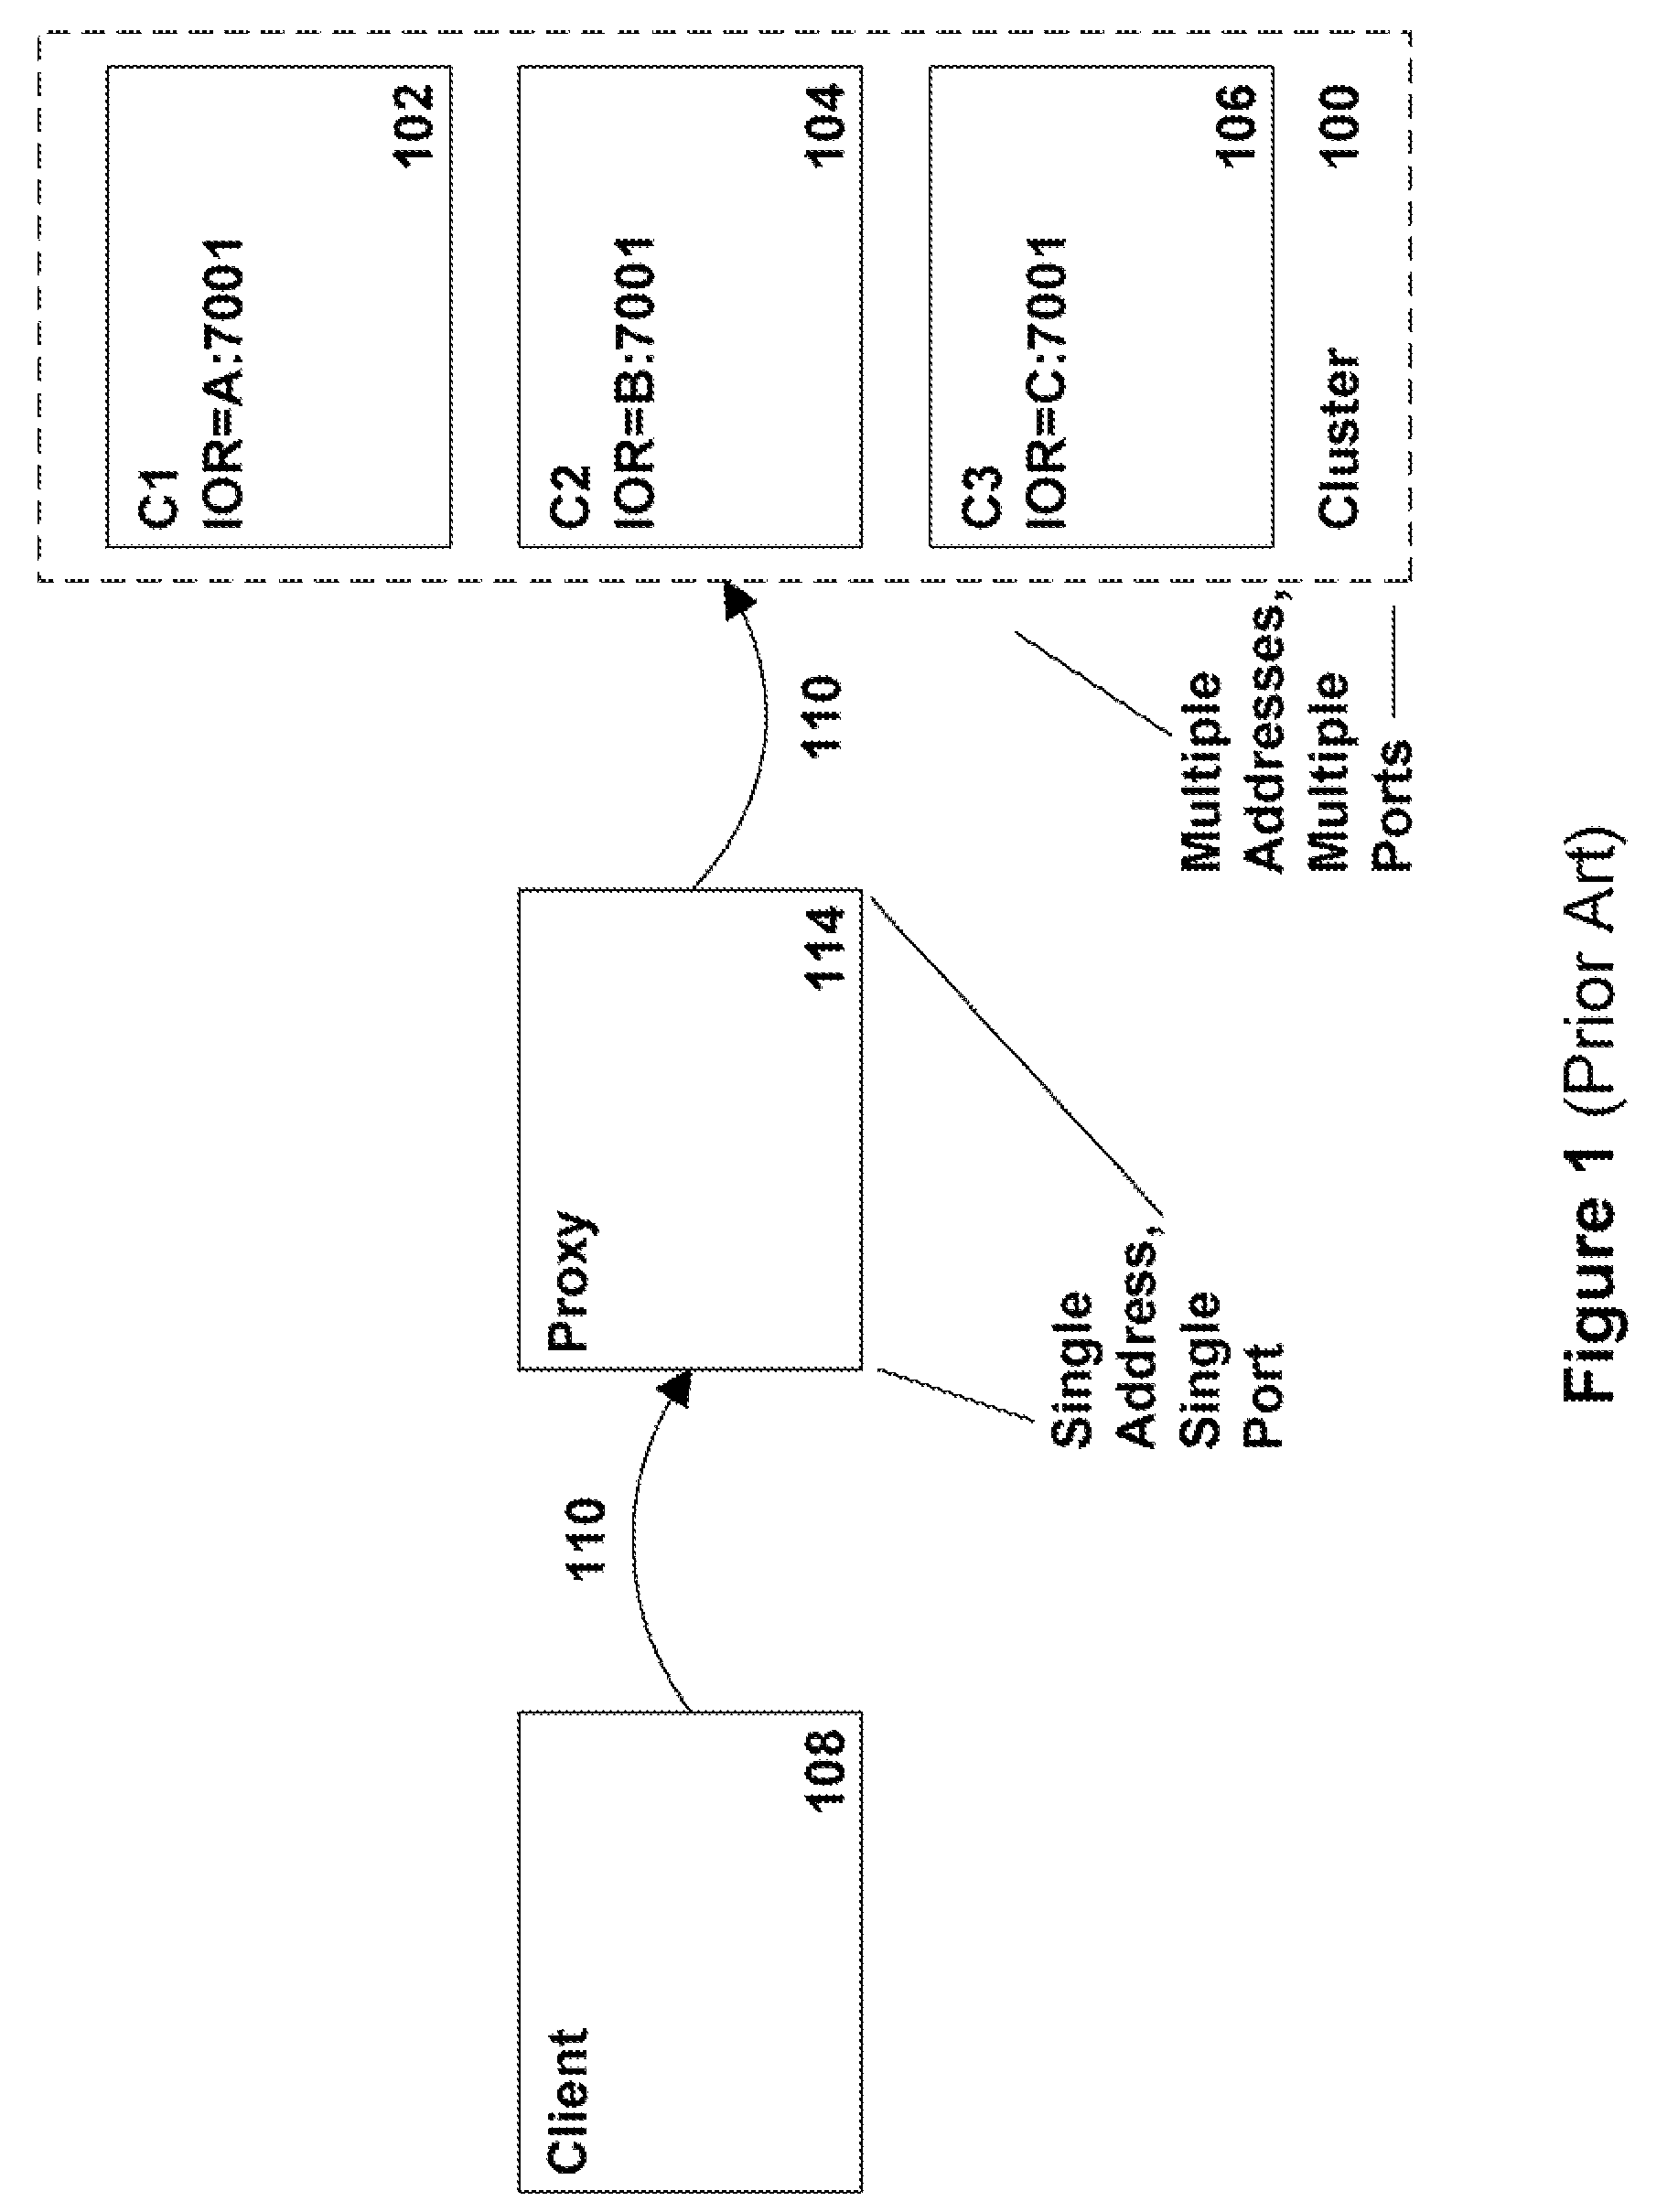 System and method for clustered tunneling of requests in application servers and transaction-based systems